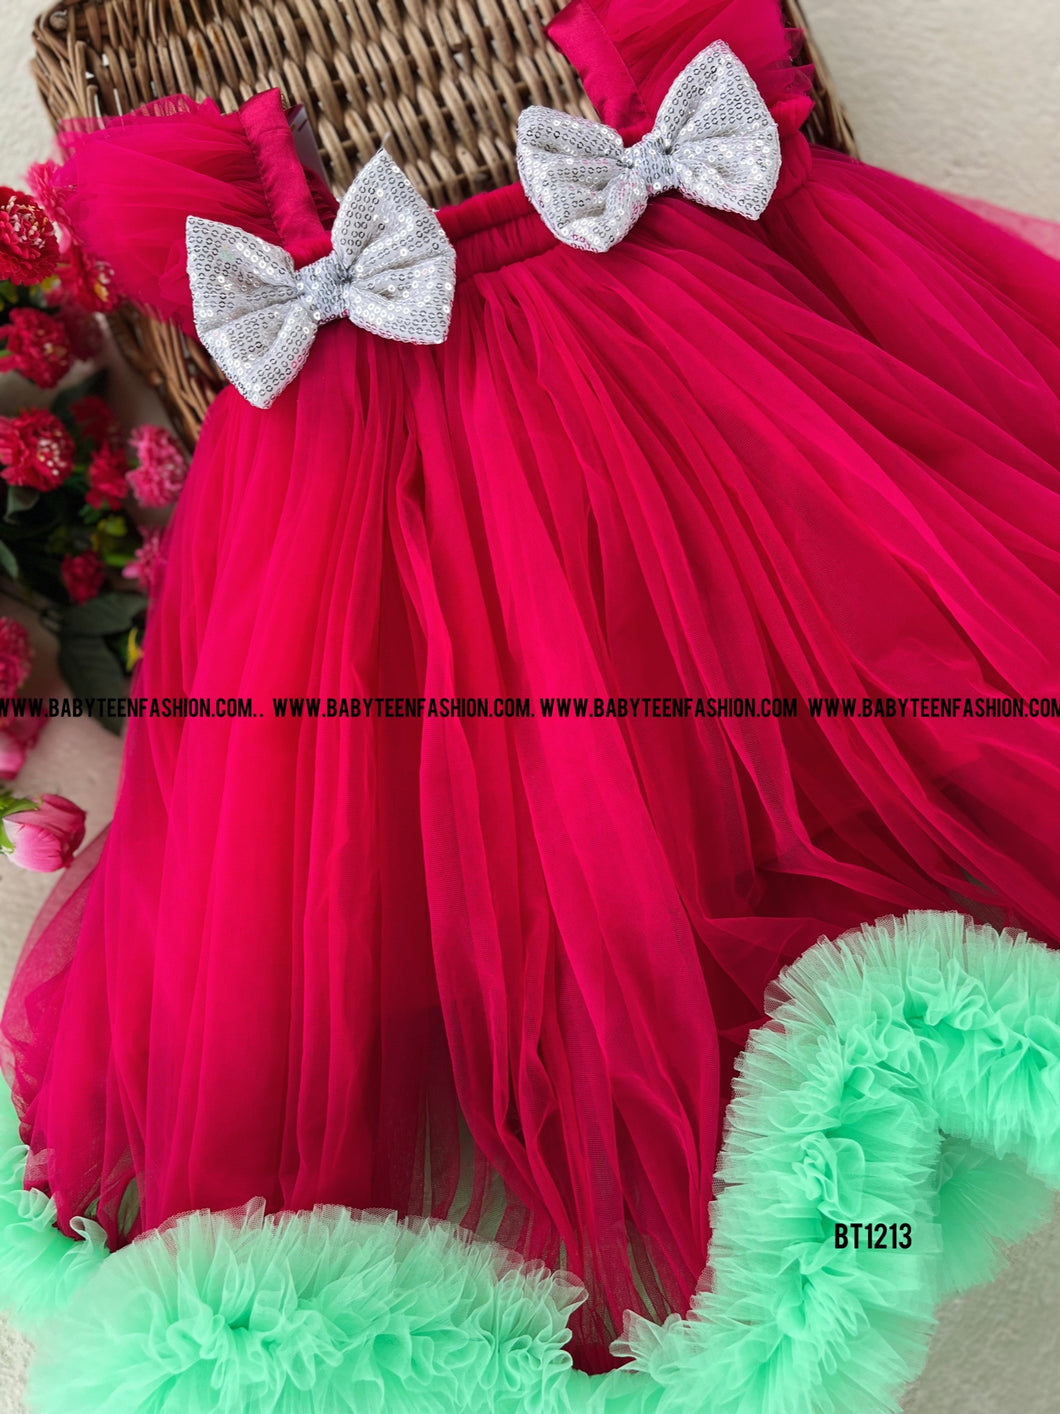 BT1213 Ruby Red Sparkle Dress – For Memories as Bright as Her Smile